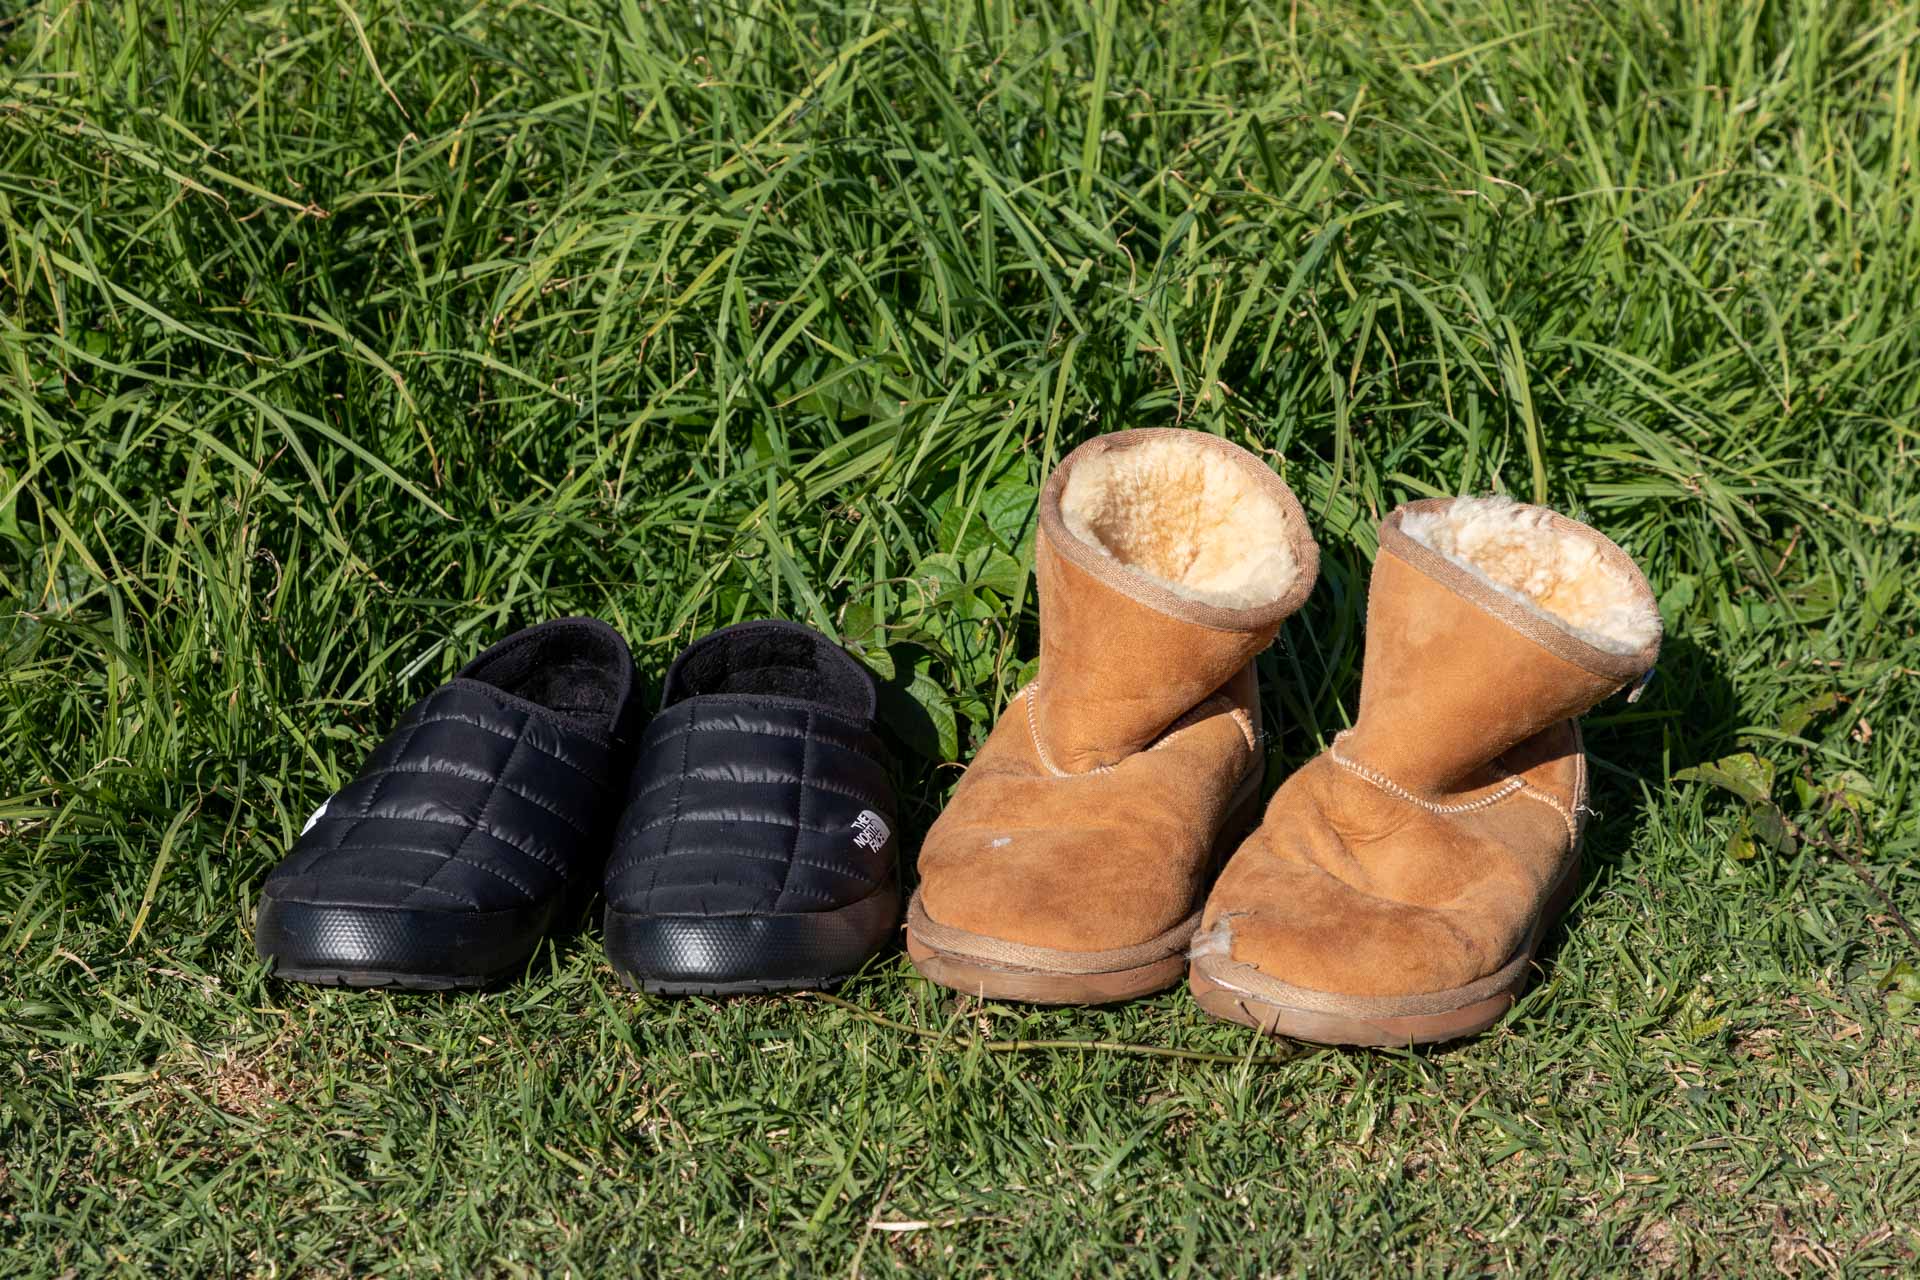 Our Favorite Ugg Boots - Somewhere, Lately  Ugg boots outfit, Uggs outfit  winter, Winter boots outfits